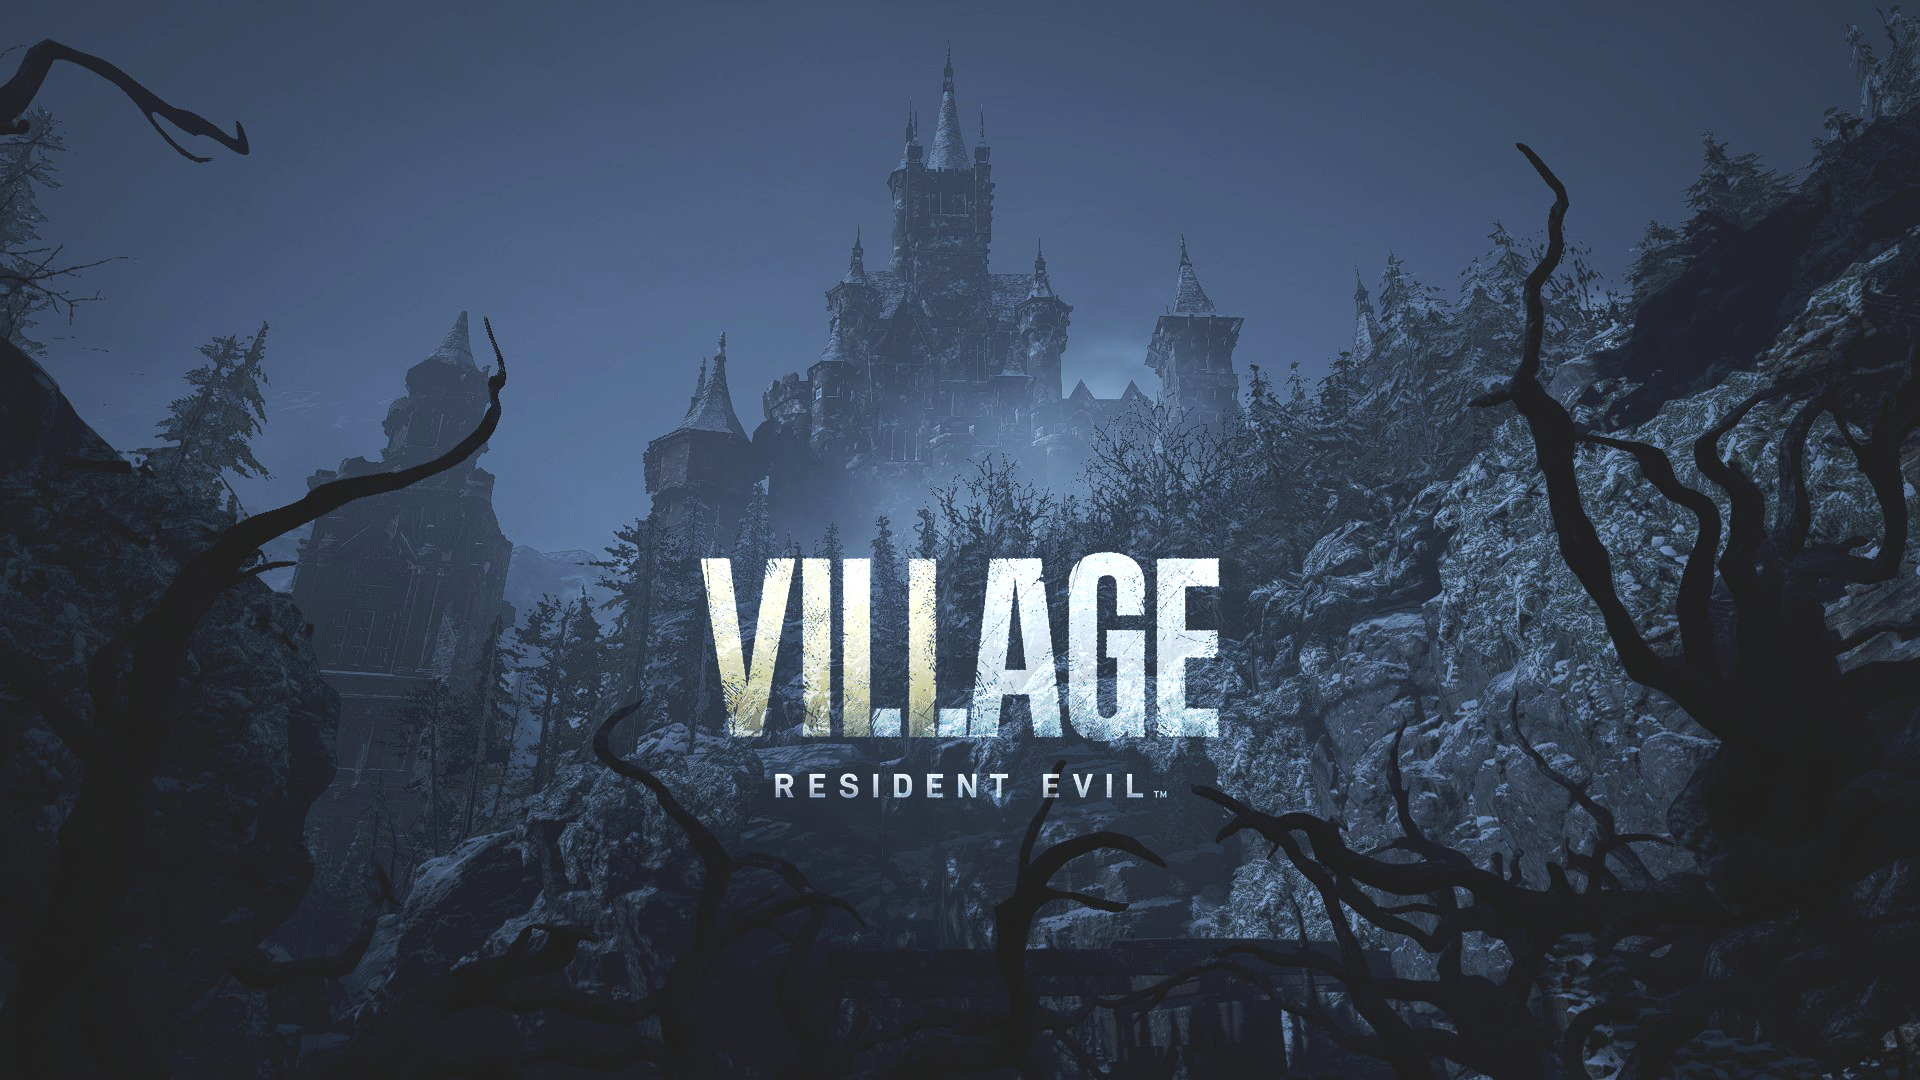 Buy Resident Evil Village from the Humble Store